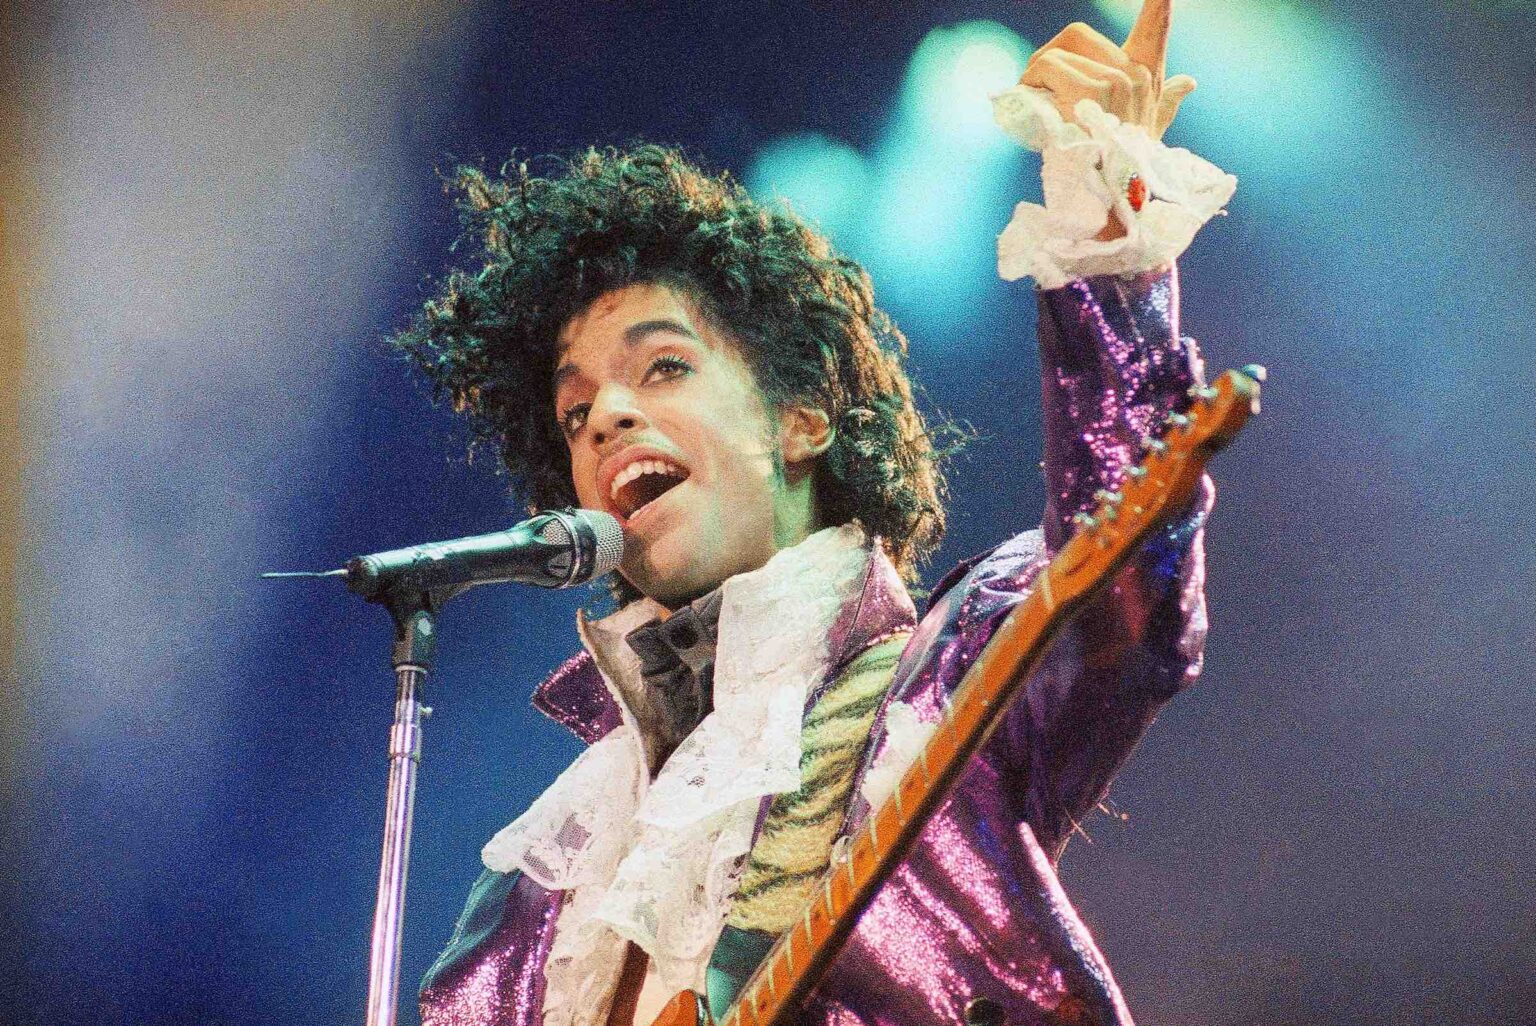 Four years ago on April 21, 2016, the musician Prince died at the age of 57. Is there more to the story? Here's everything we know about Prince's death.